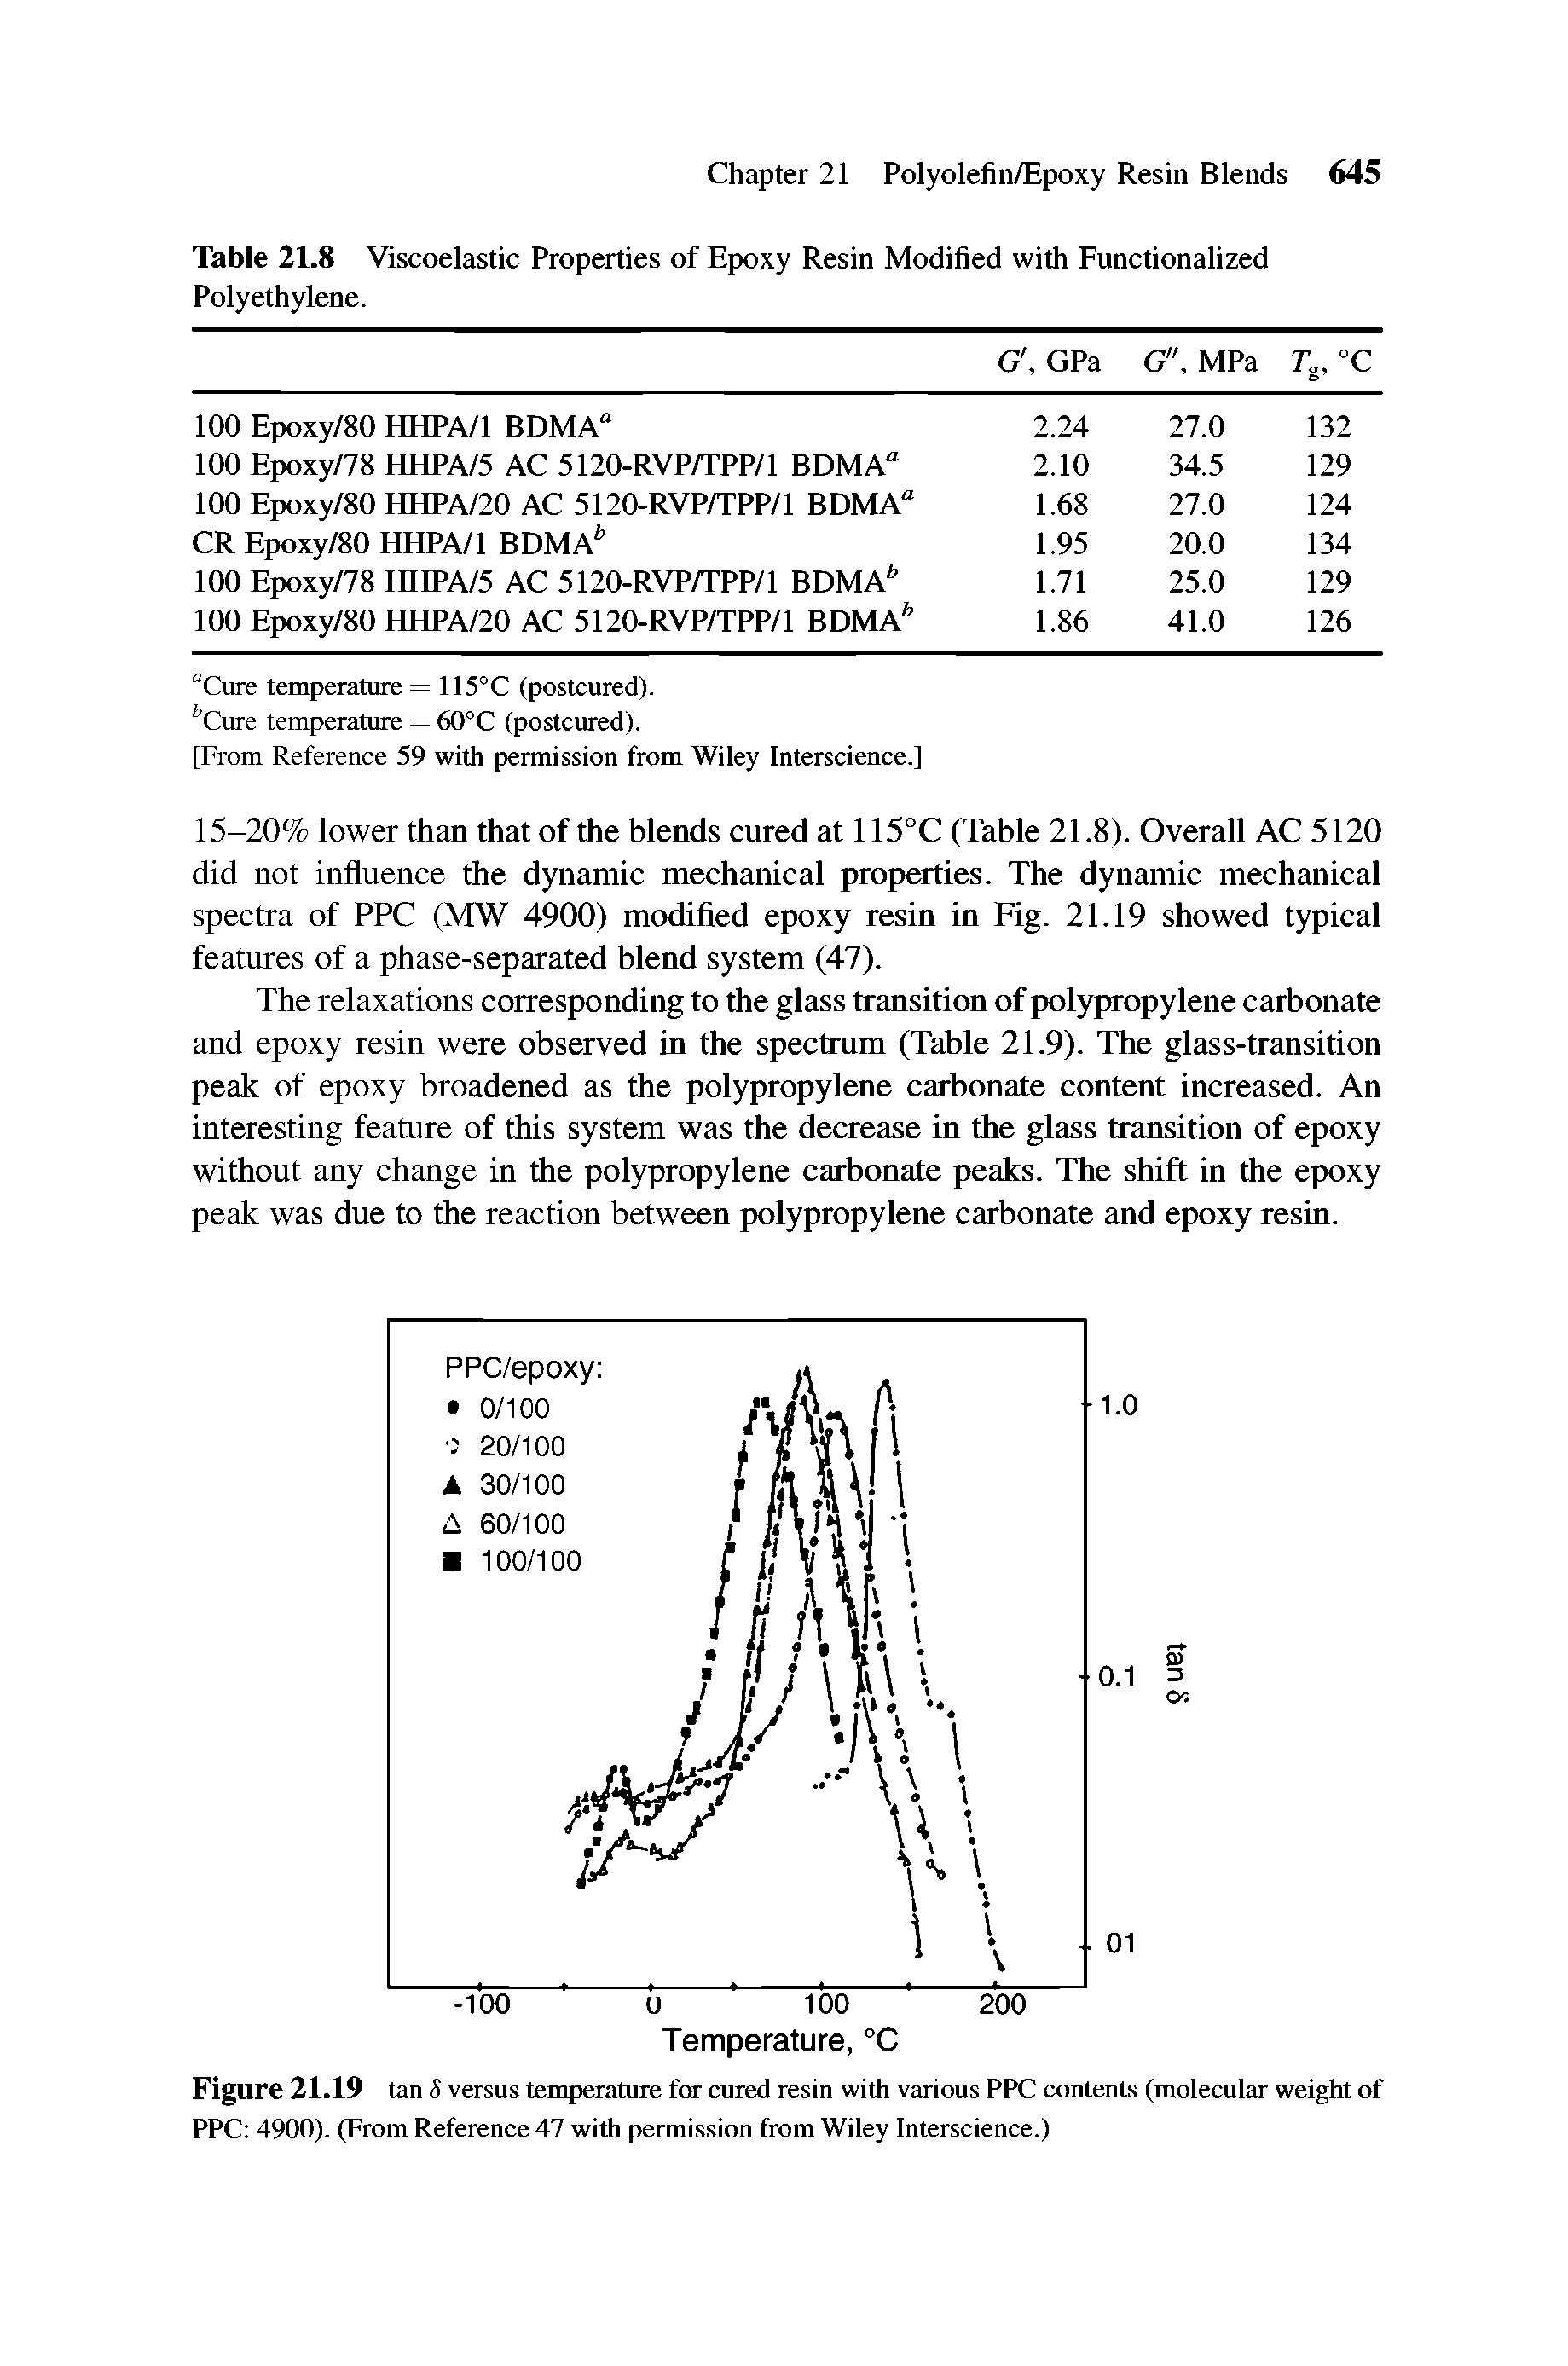 Table 21.8 Viscoelastic Properties of Epoxy Resin Modified with Functionalized Polyethylene.